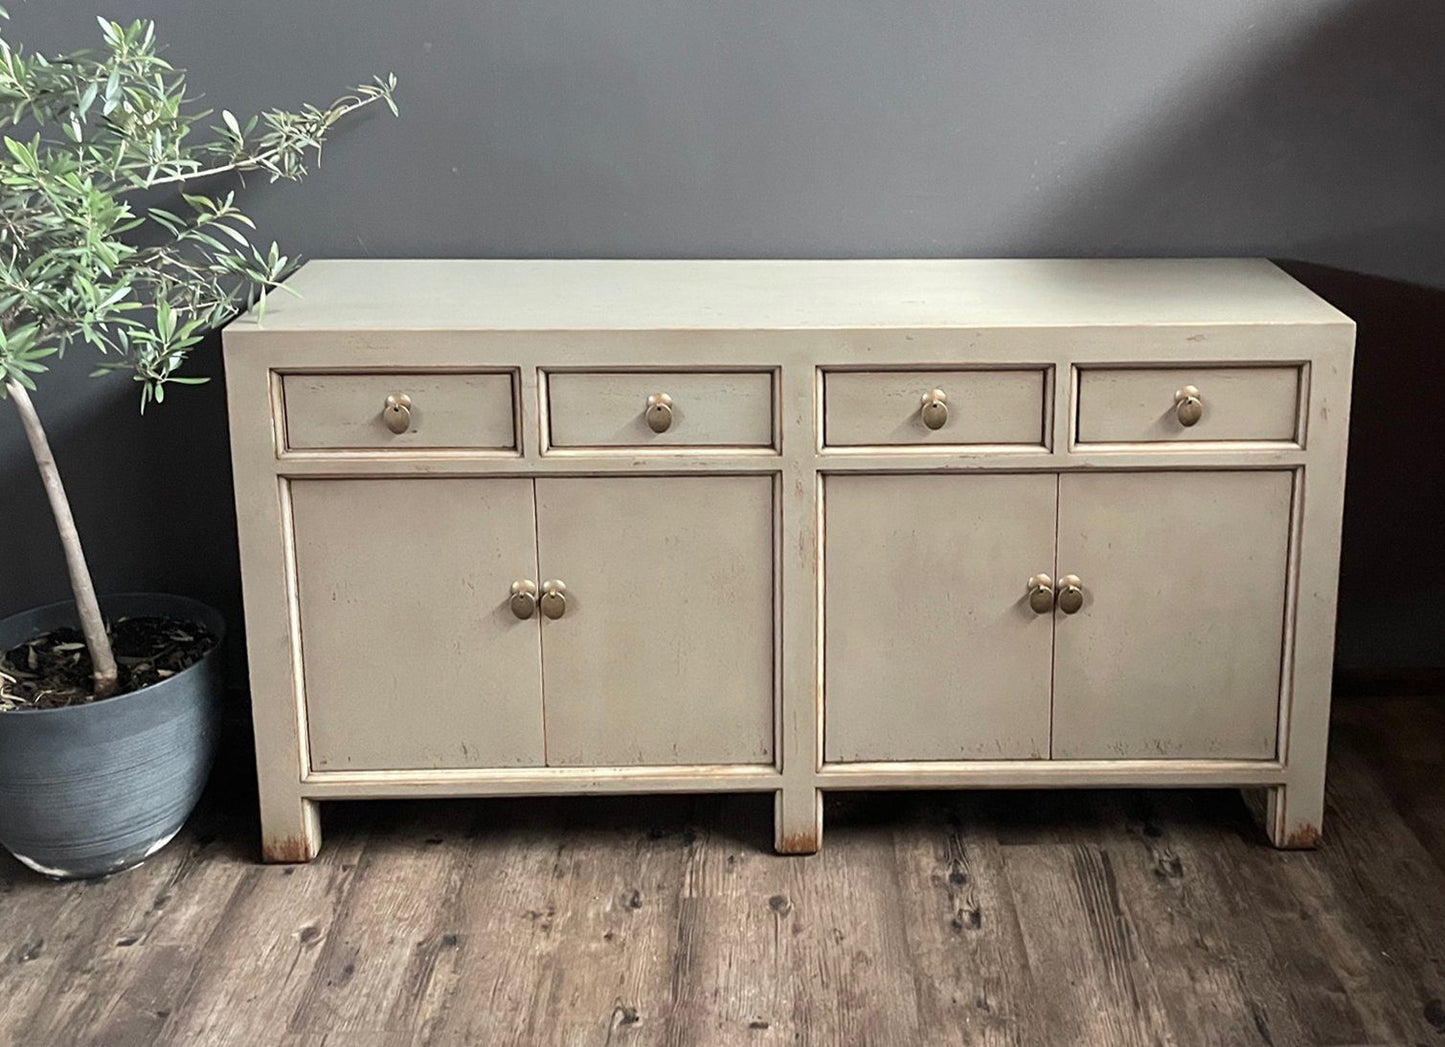 Chinese sideboard chest of drawers grey-olive - Art. 31196-greyolive